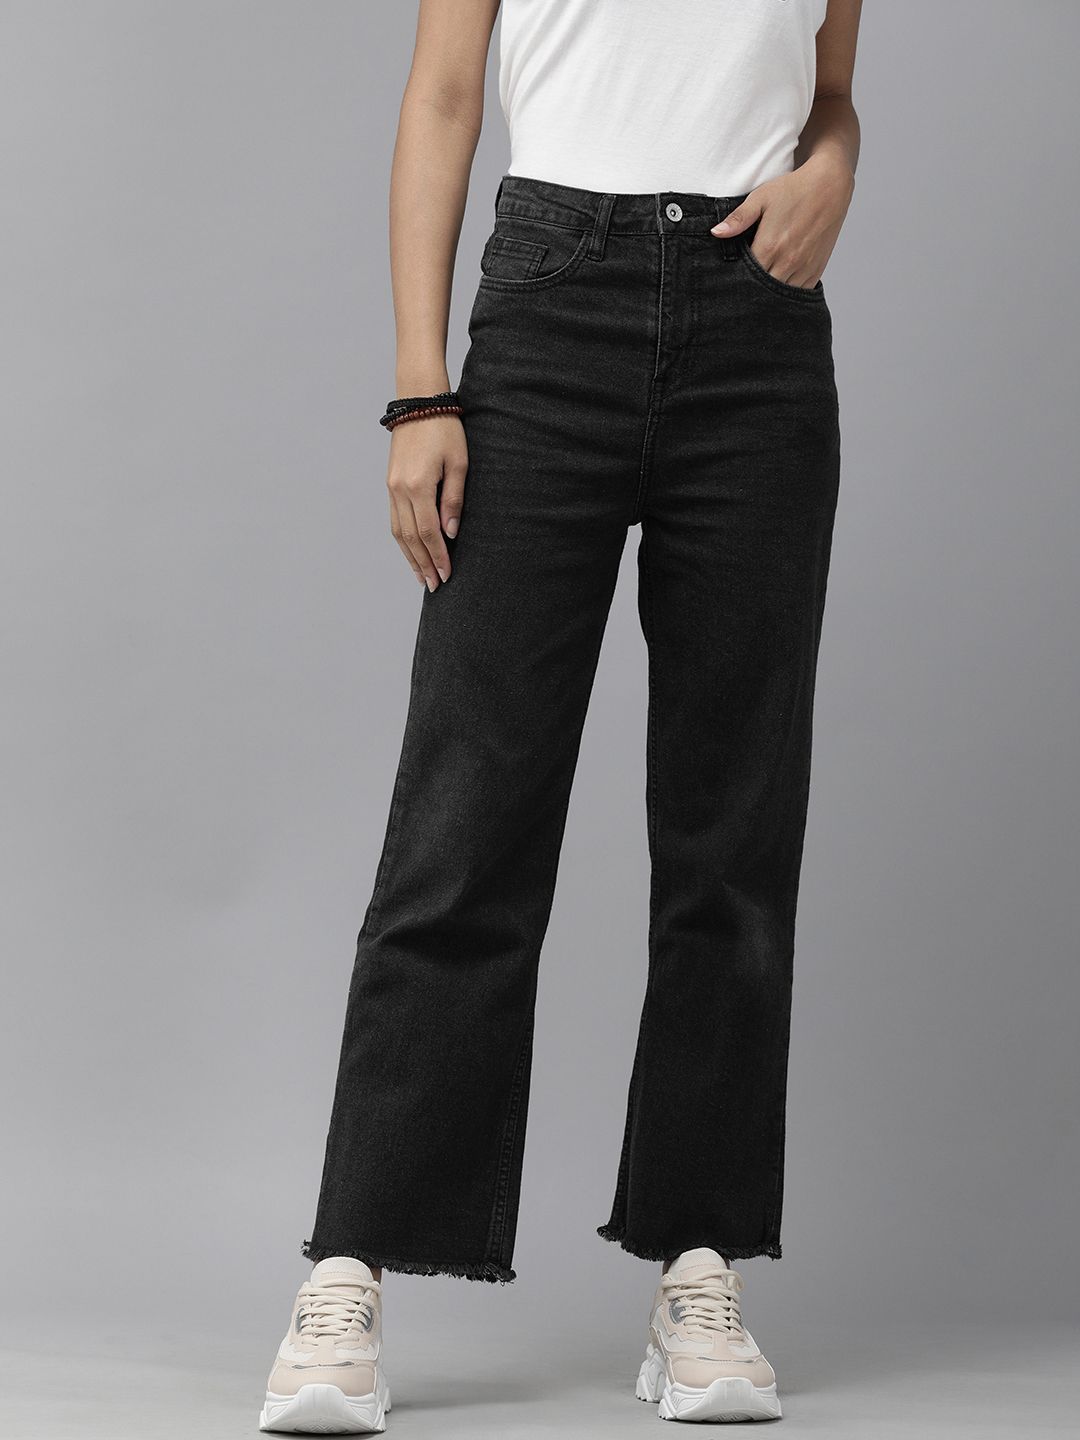 The Roadster Lifestyle Co Women Charcoal Grey Wide Leg High-Rise Stretchable Jeans Price in India